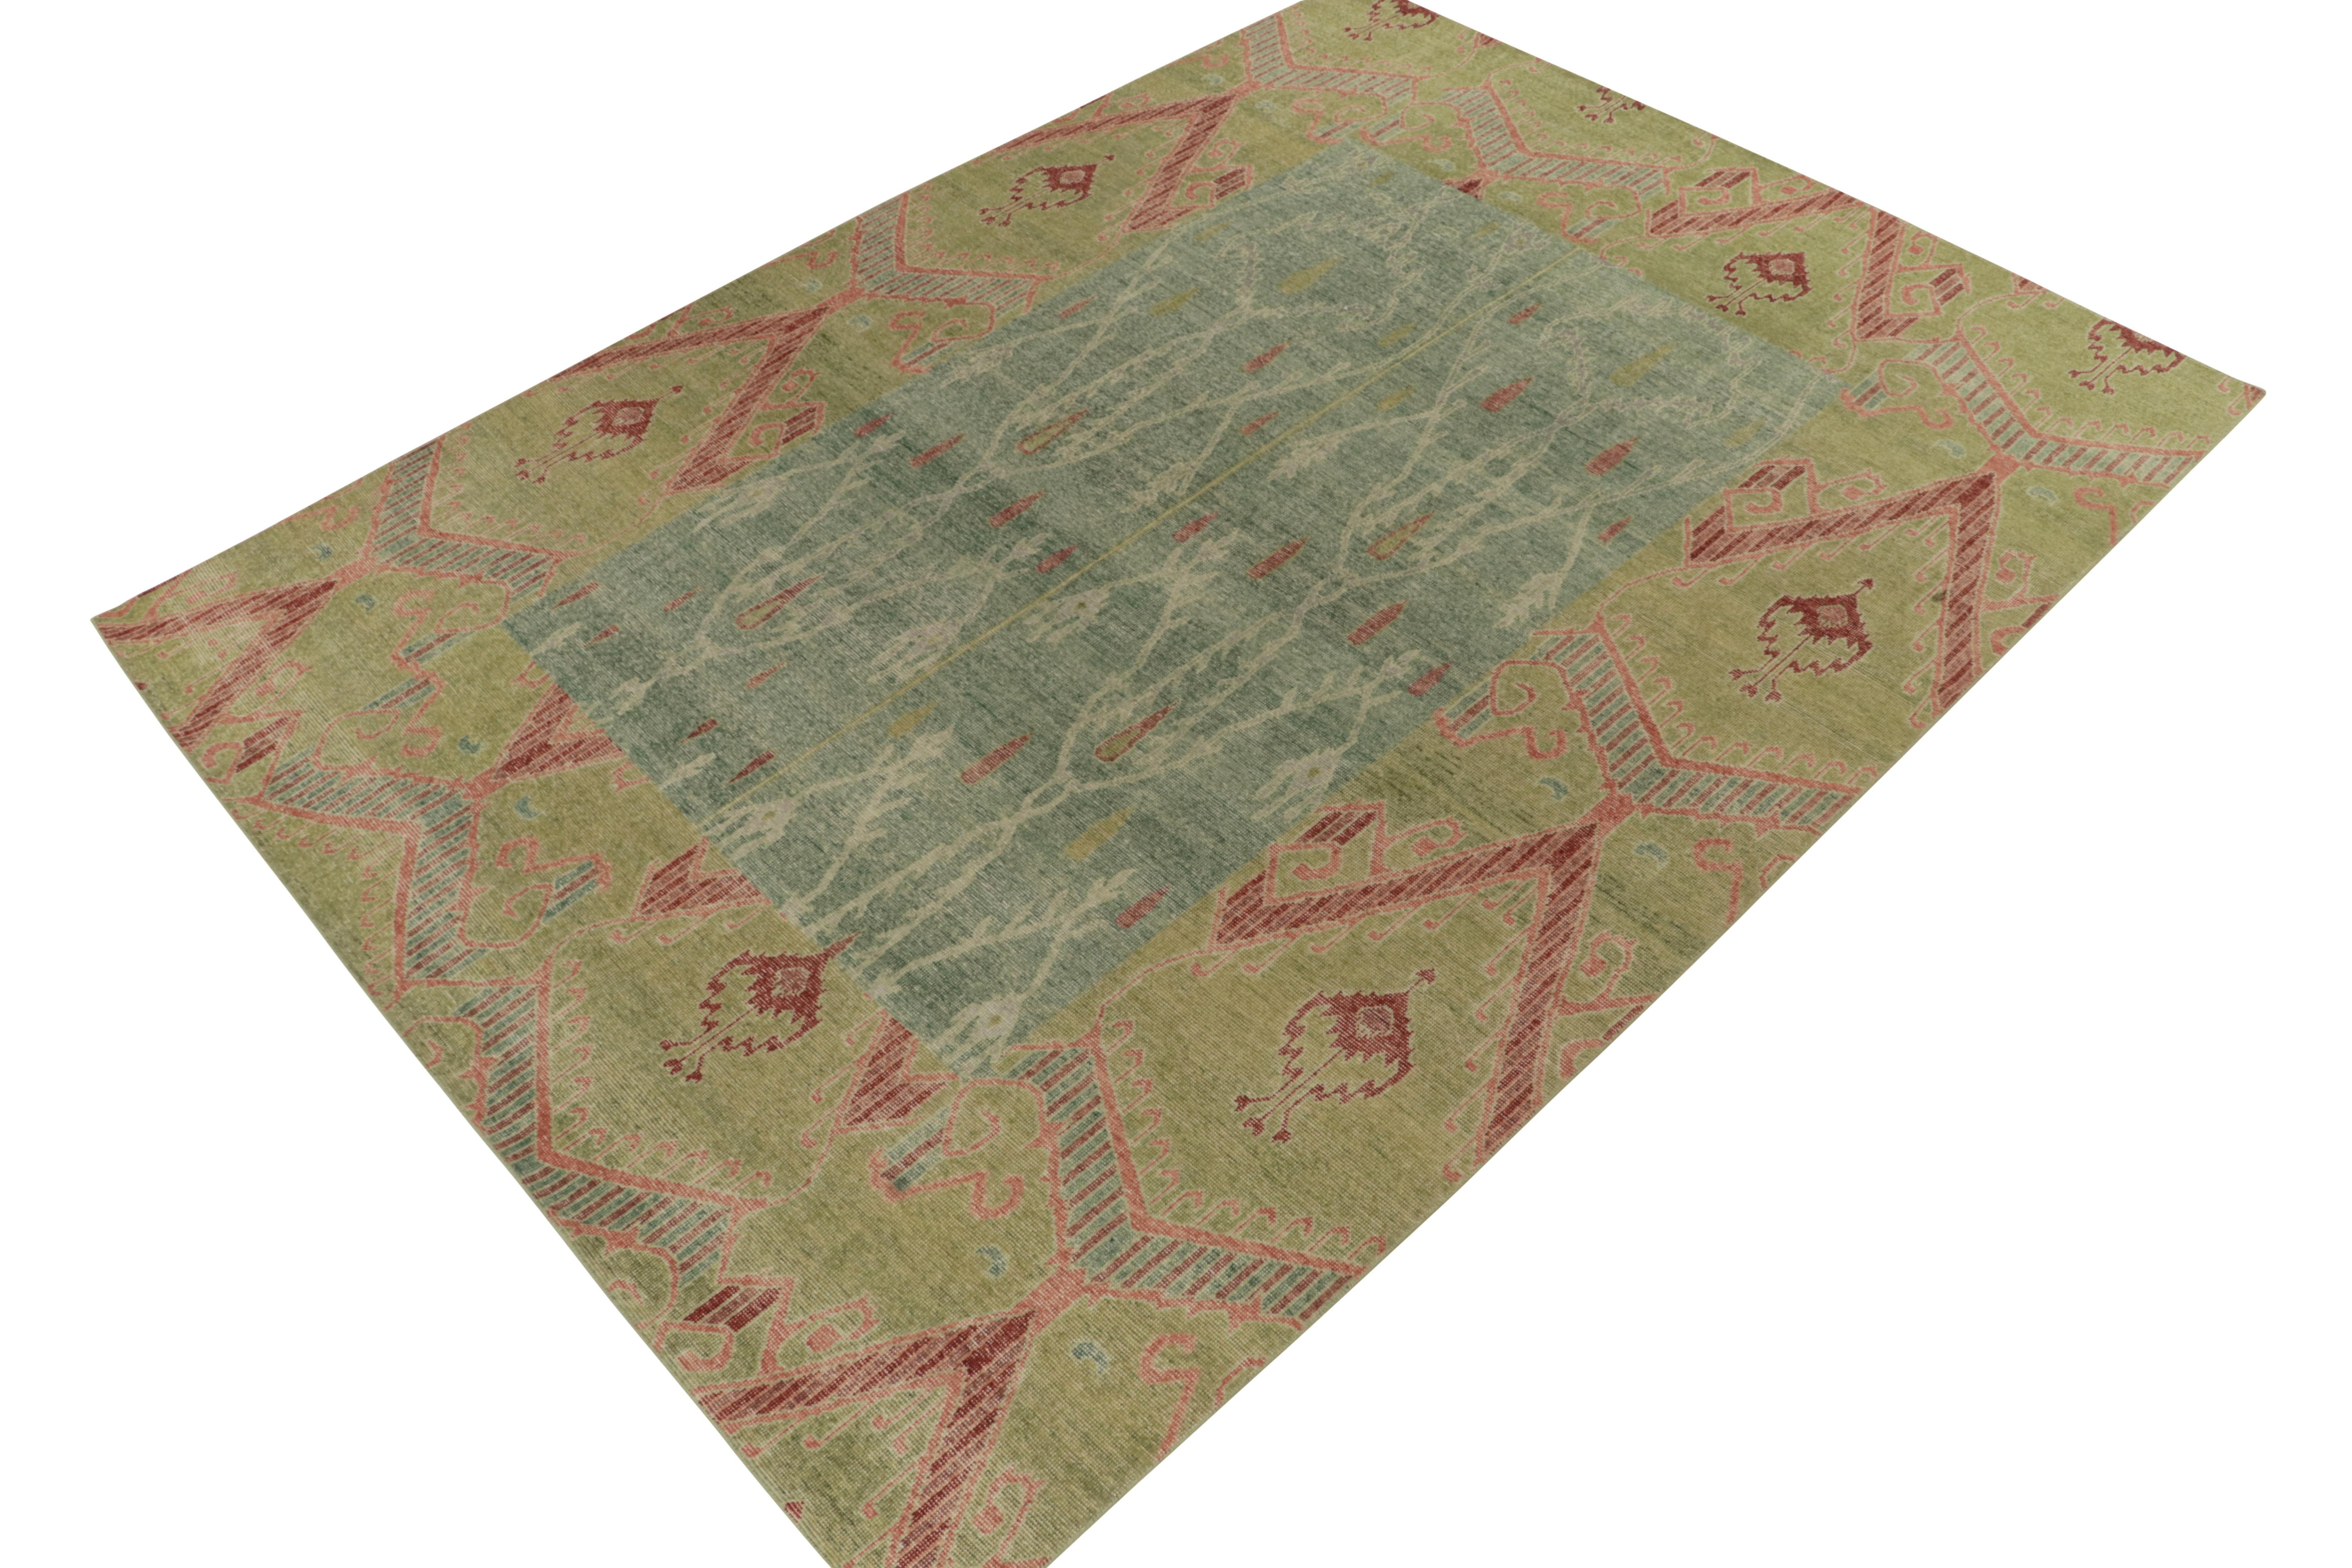 A gorgeous 9x12 hand-knotted wool rug from Rug & Kilim’s Homage Collection—a bold textural encyclopedia of iconic patterns and styles. 

This classic inspiration marks a 19th century Uzbekistani take on kats patterns in bold, warm colors of green,